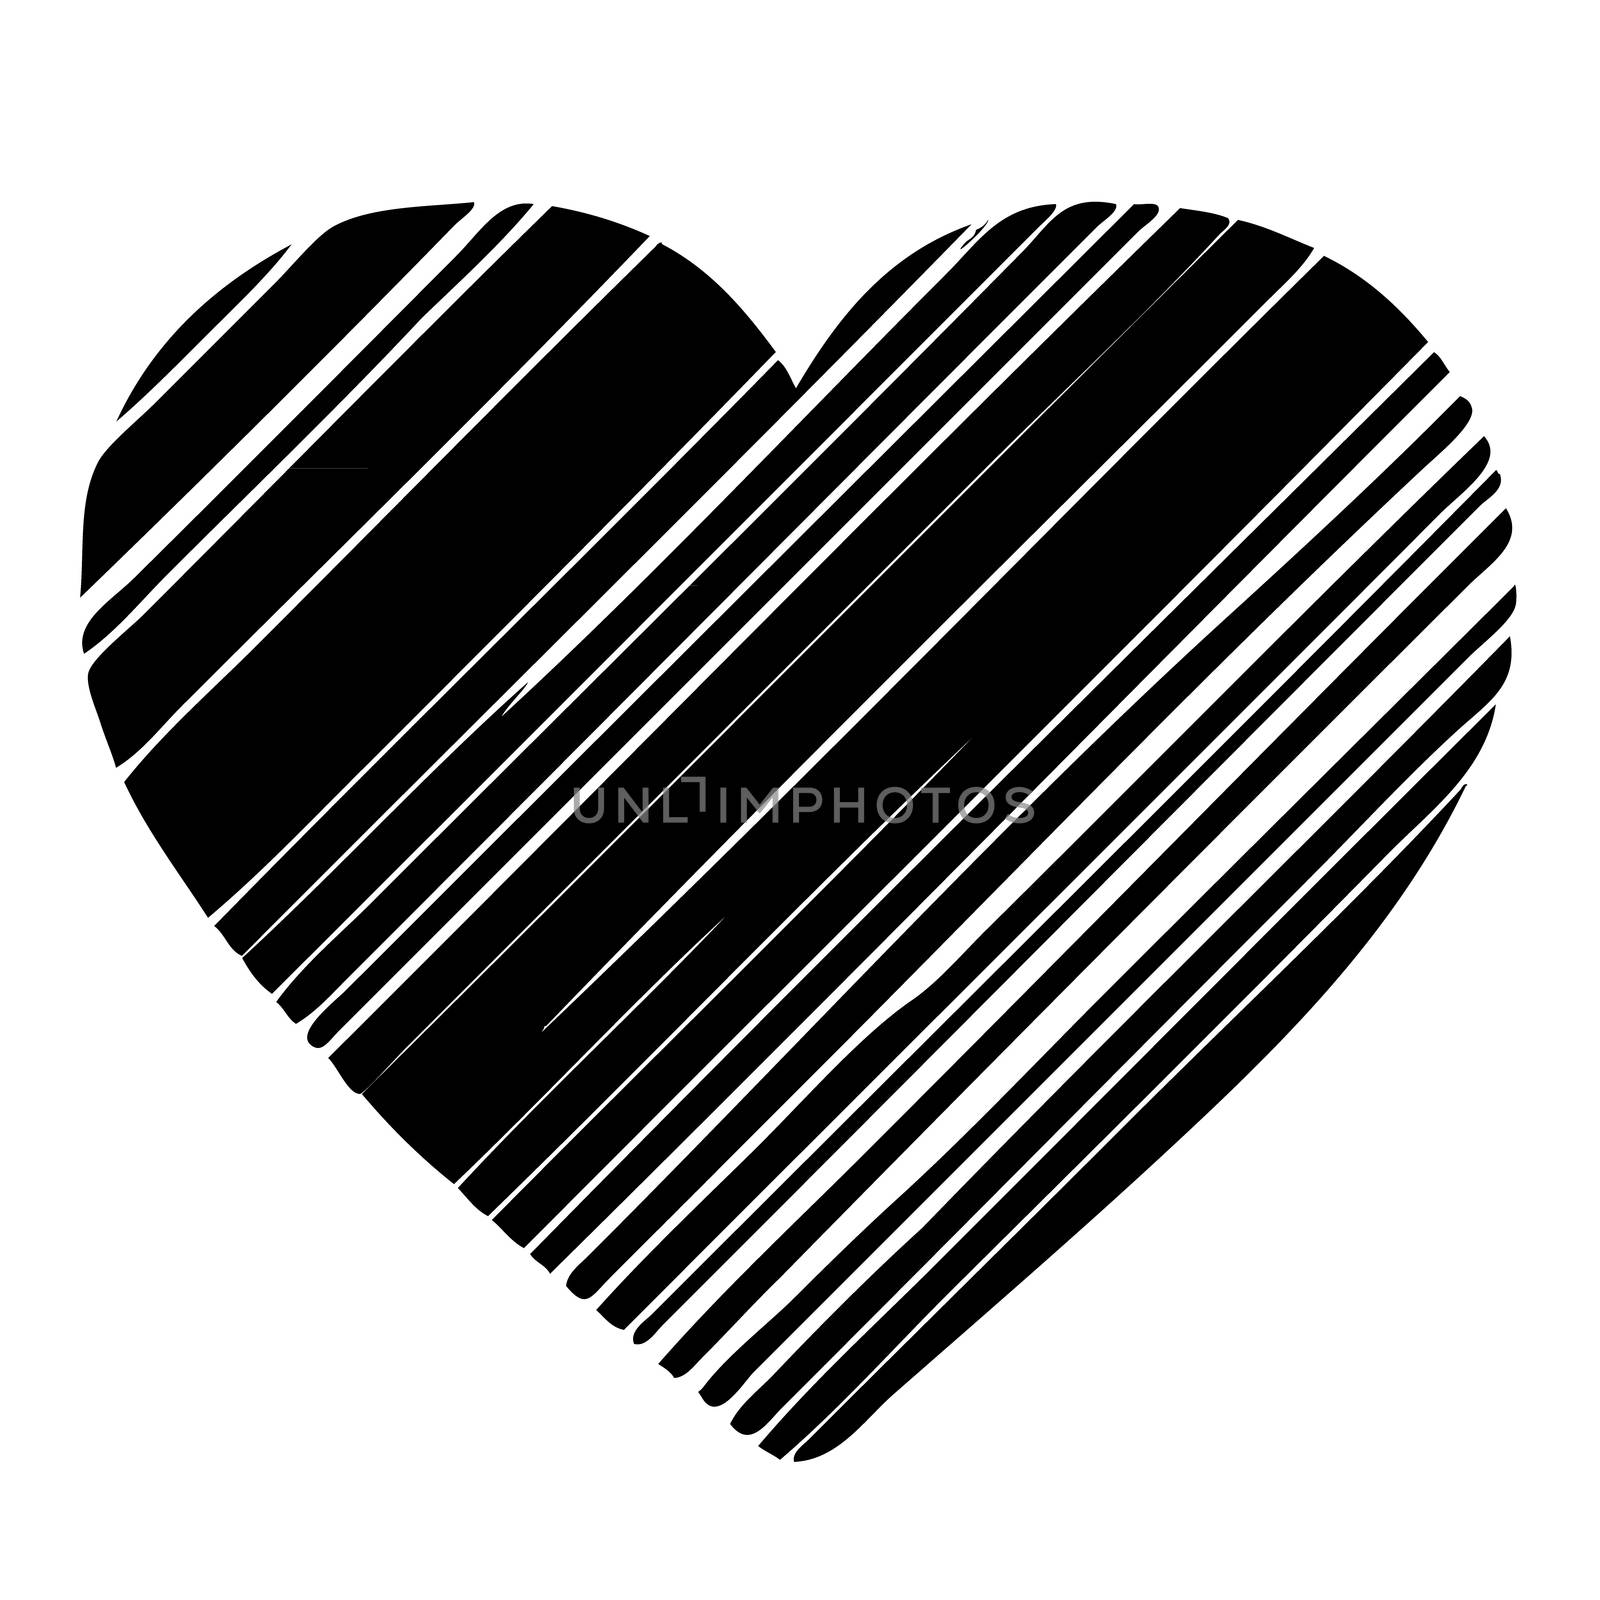 doodle design in heart shaped on white background